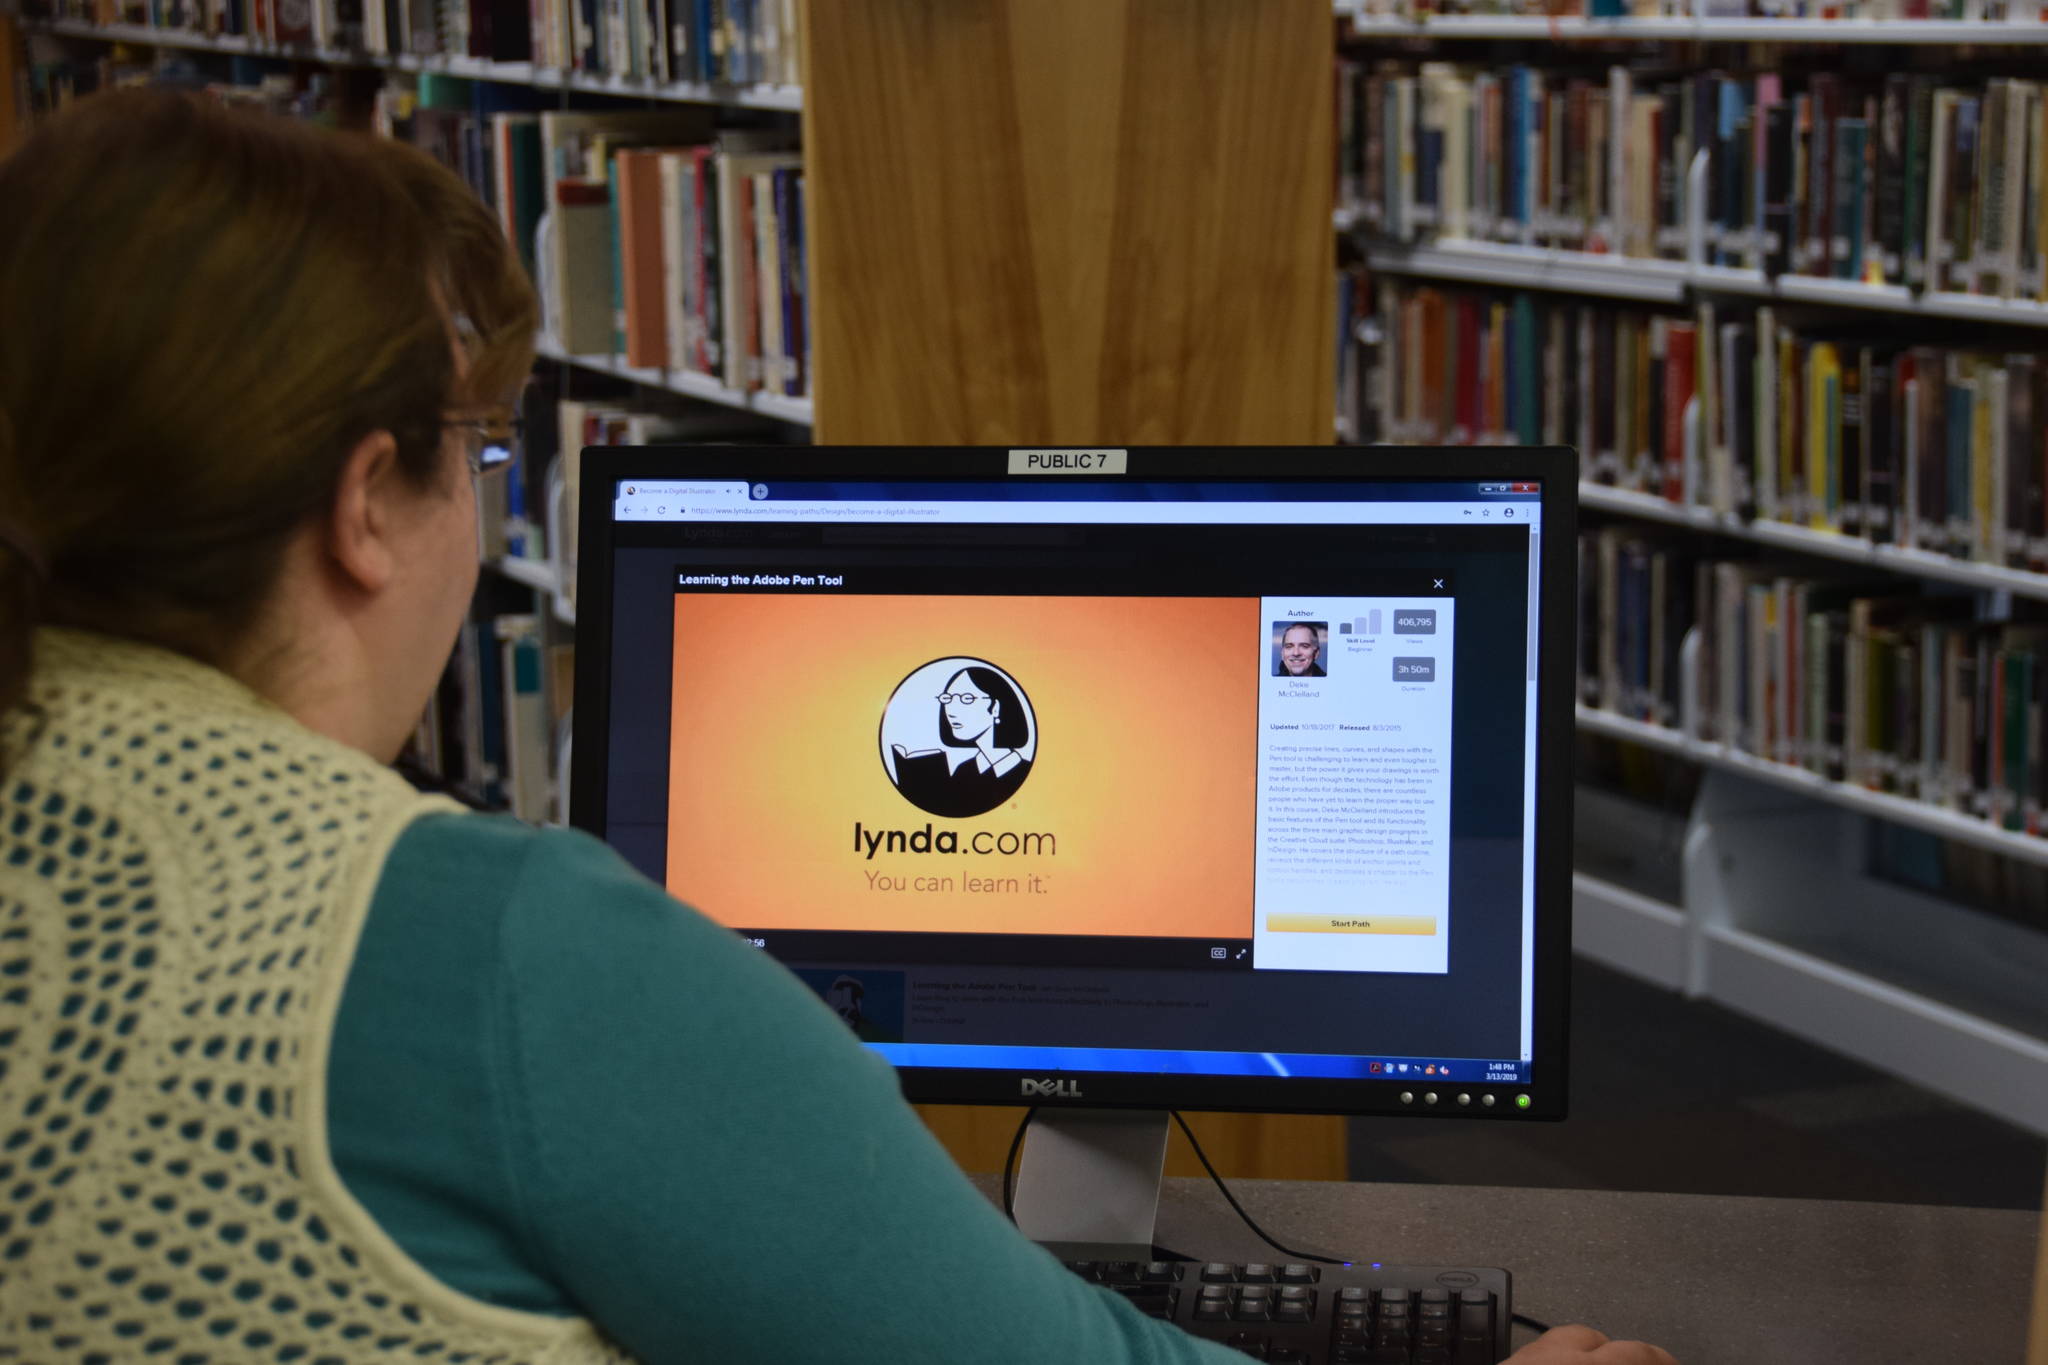 Kenai librarian Bethany McMilin demonstrates how to use Lynda.com, an online learning resource available for free through the public library system, at the Kenai Community Library on Wednesday. (Photo by Brian Mazurek/Peninsula Clarion)